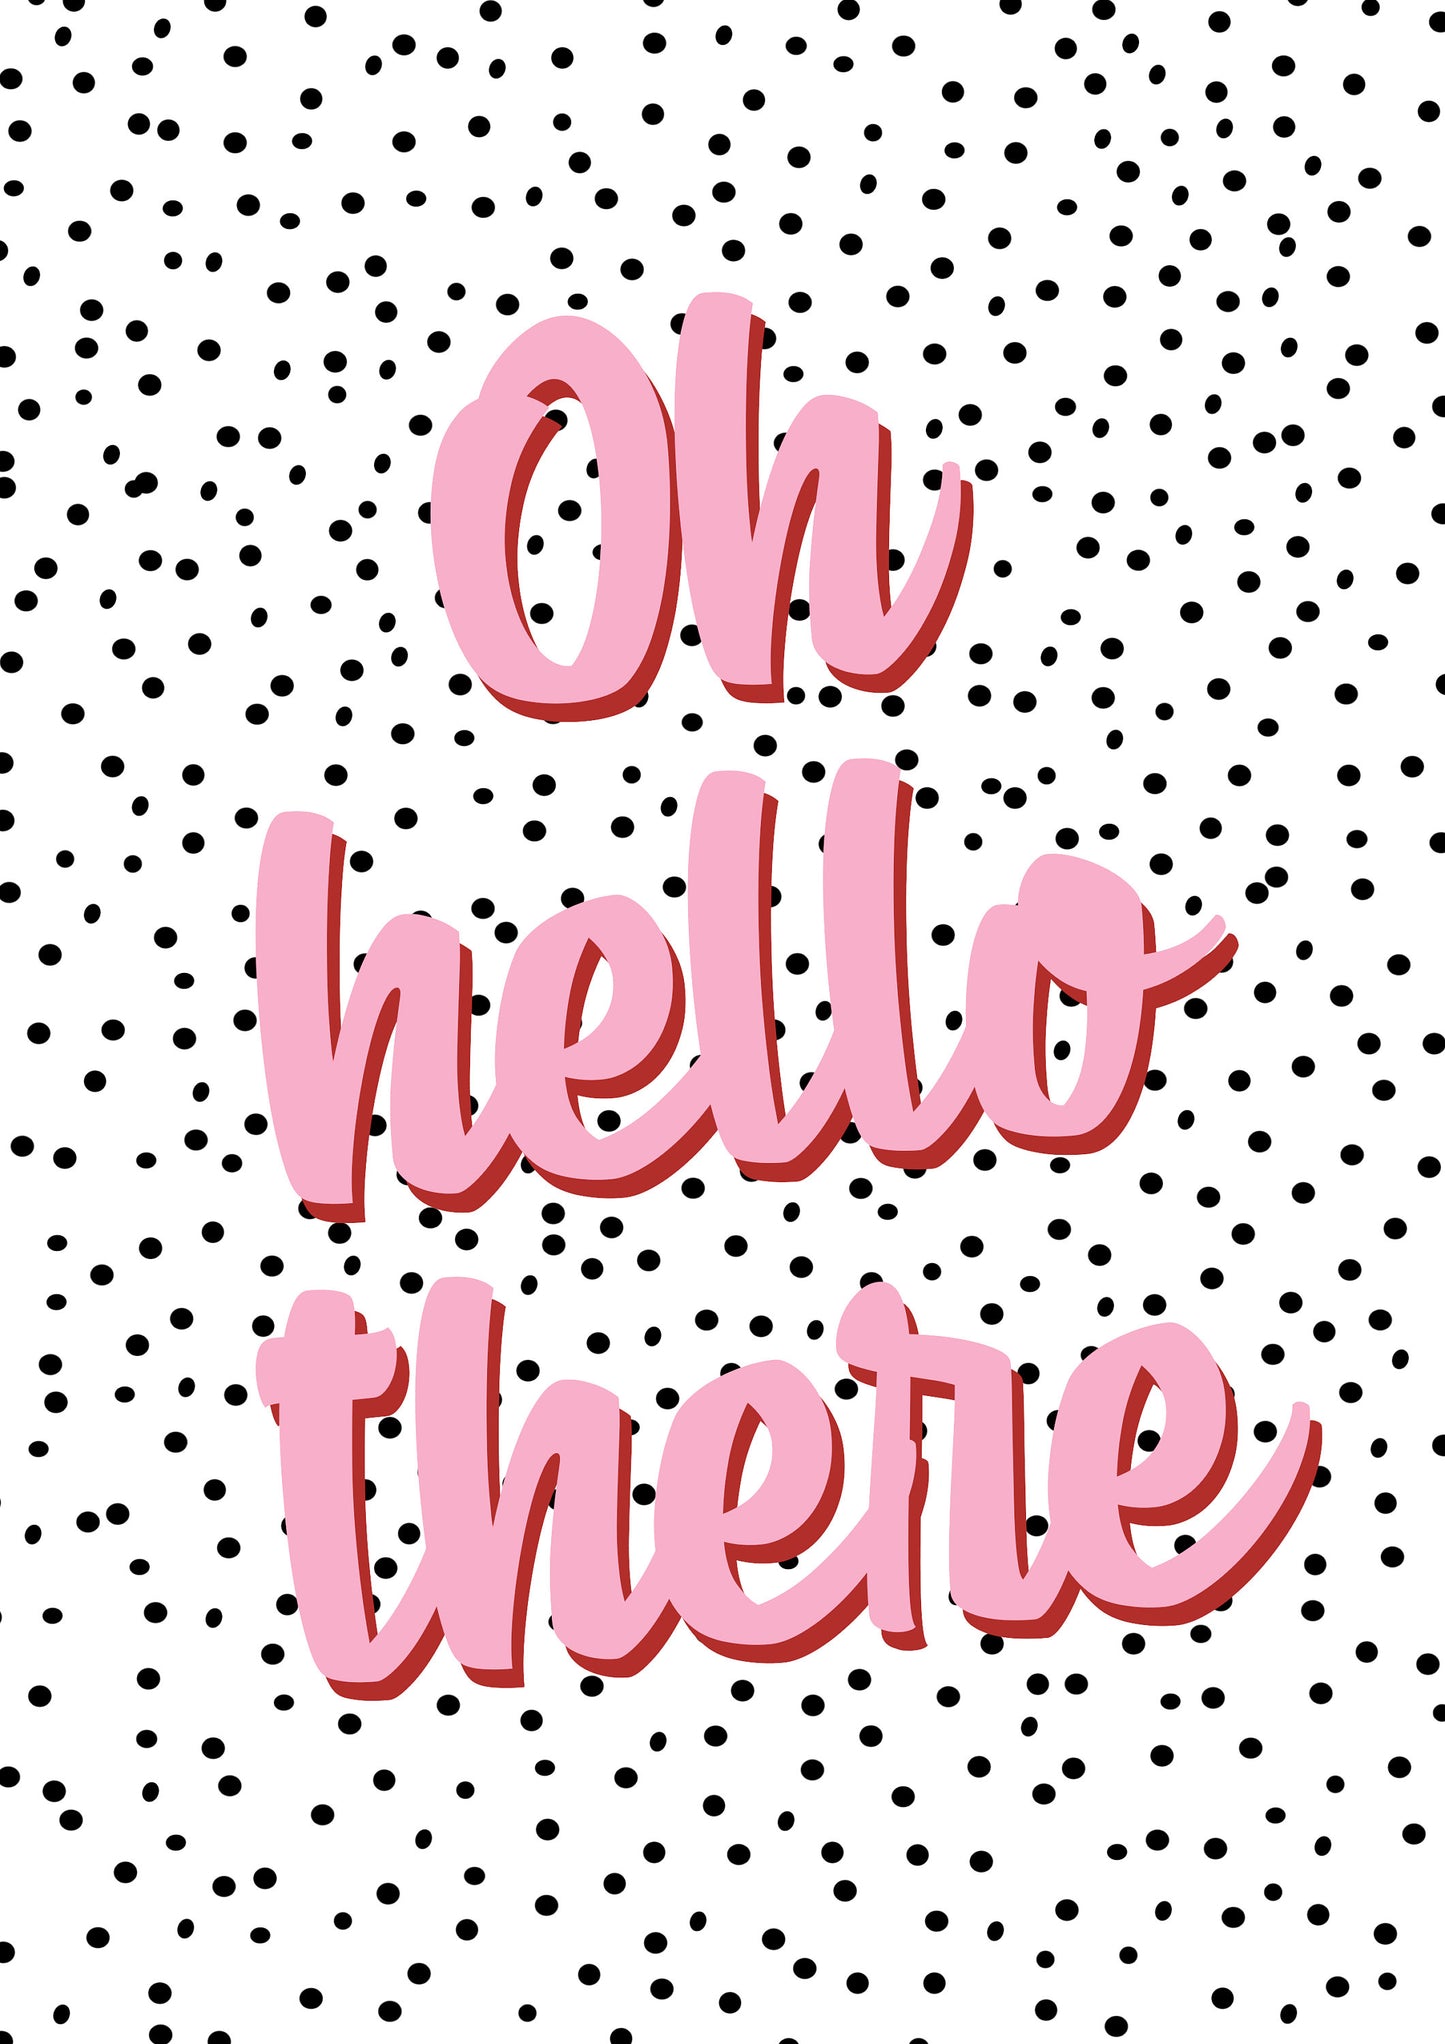 Oh Hello There Spotty Funny Quote Typography Print